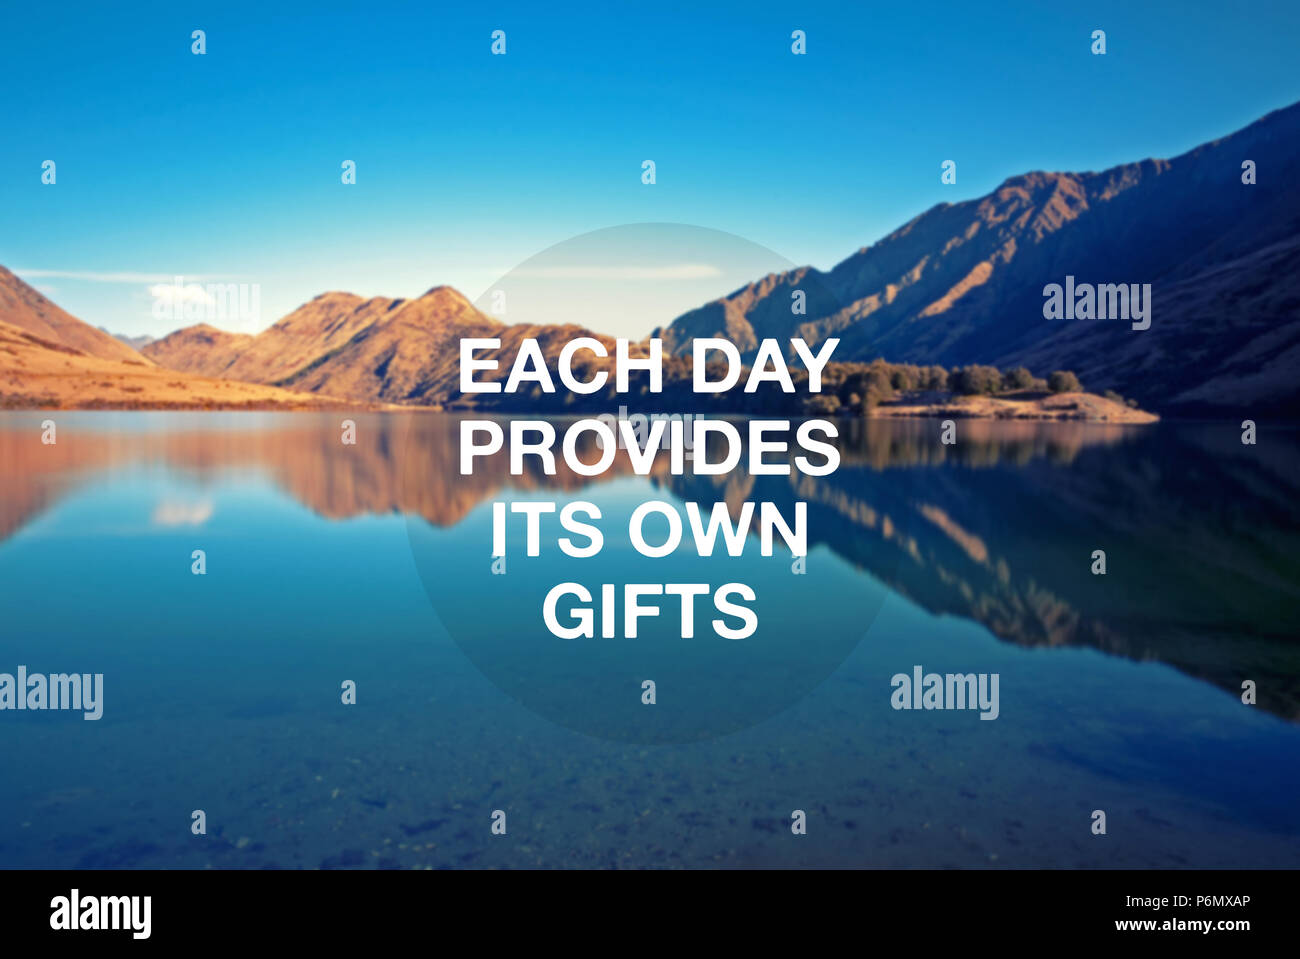 Motivational and inspirational quote - Each day provides its own gifts Stock Photo